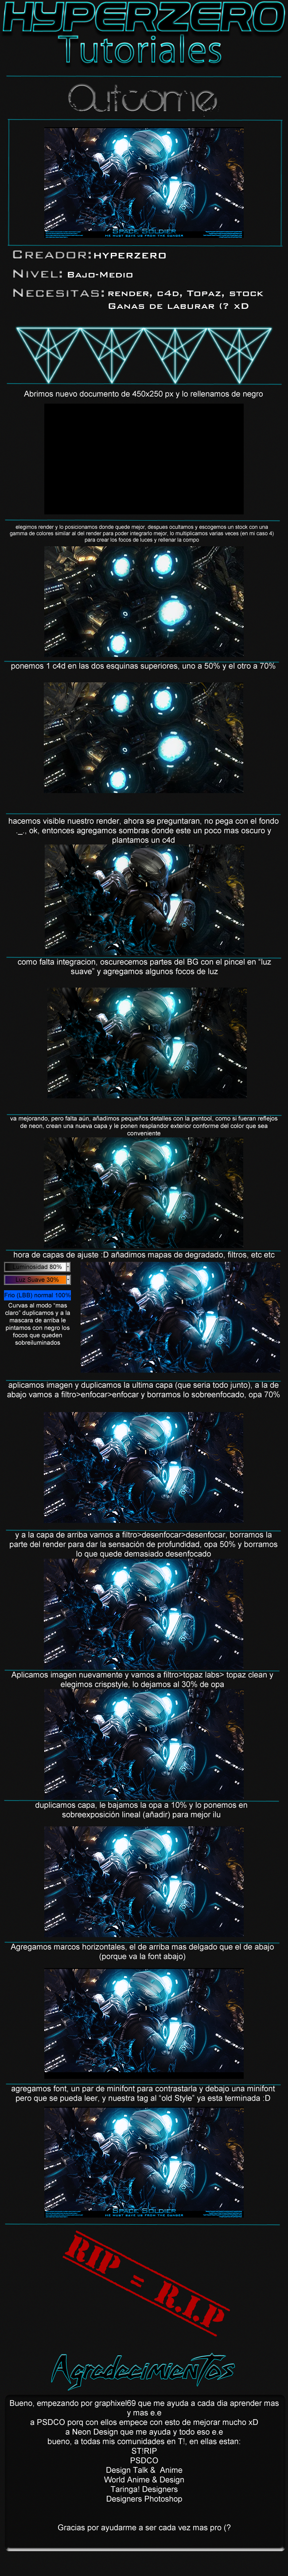 Tuto Old Style "Space Soldier" Space_soldier_tutorial_by_hyperzero-d4rsgr7